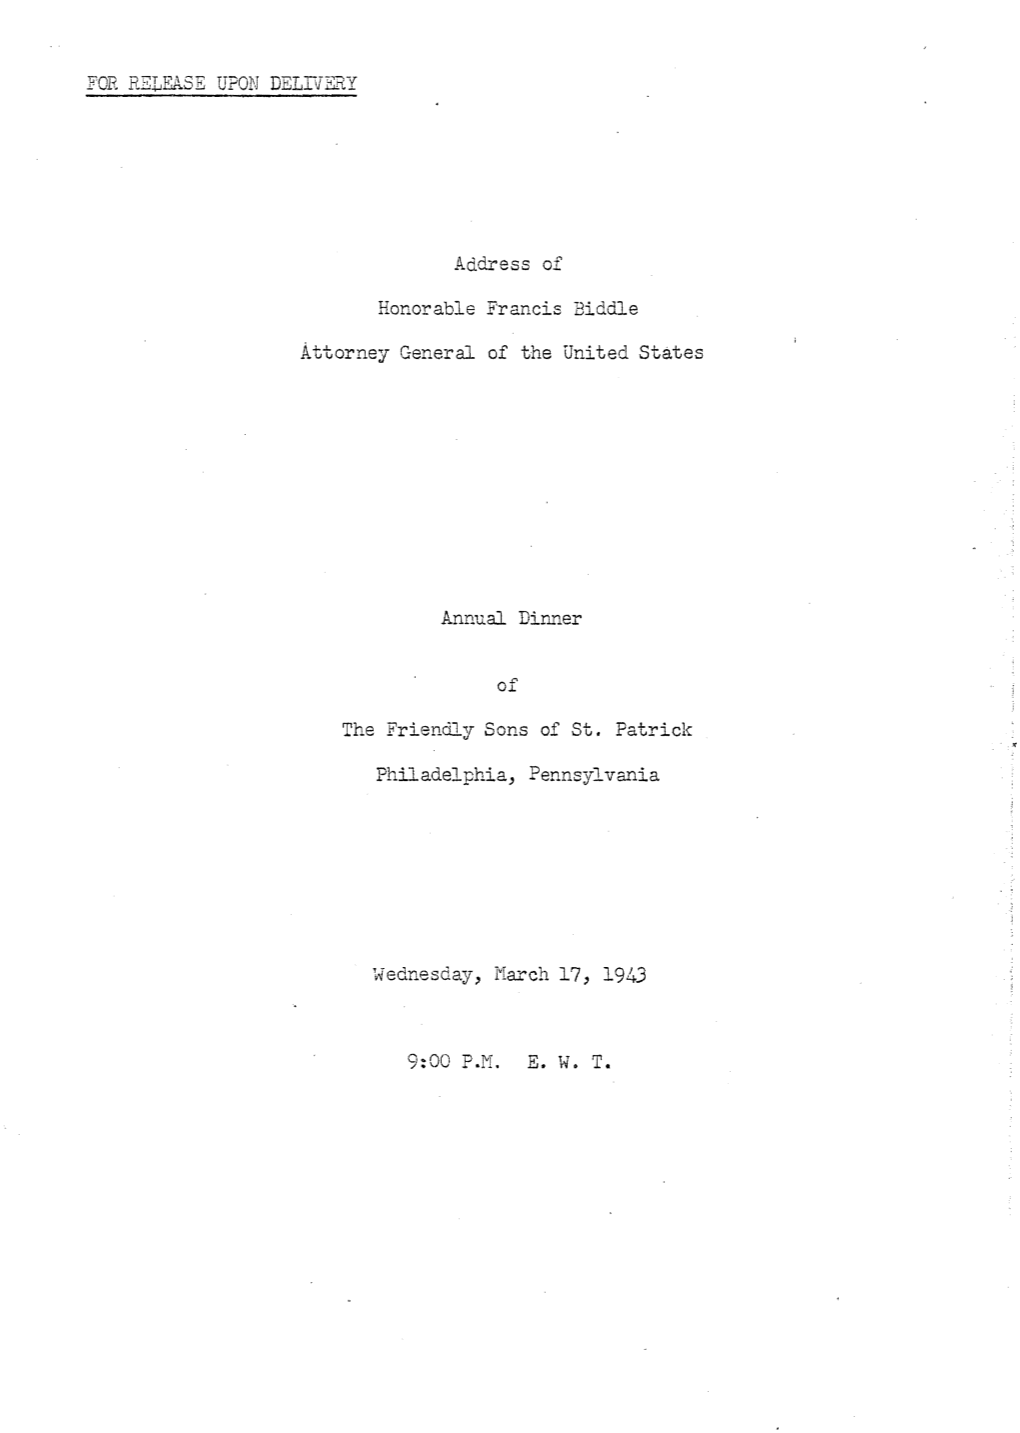 Address of Honorable Francis Biddle, Attorney General of the United